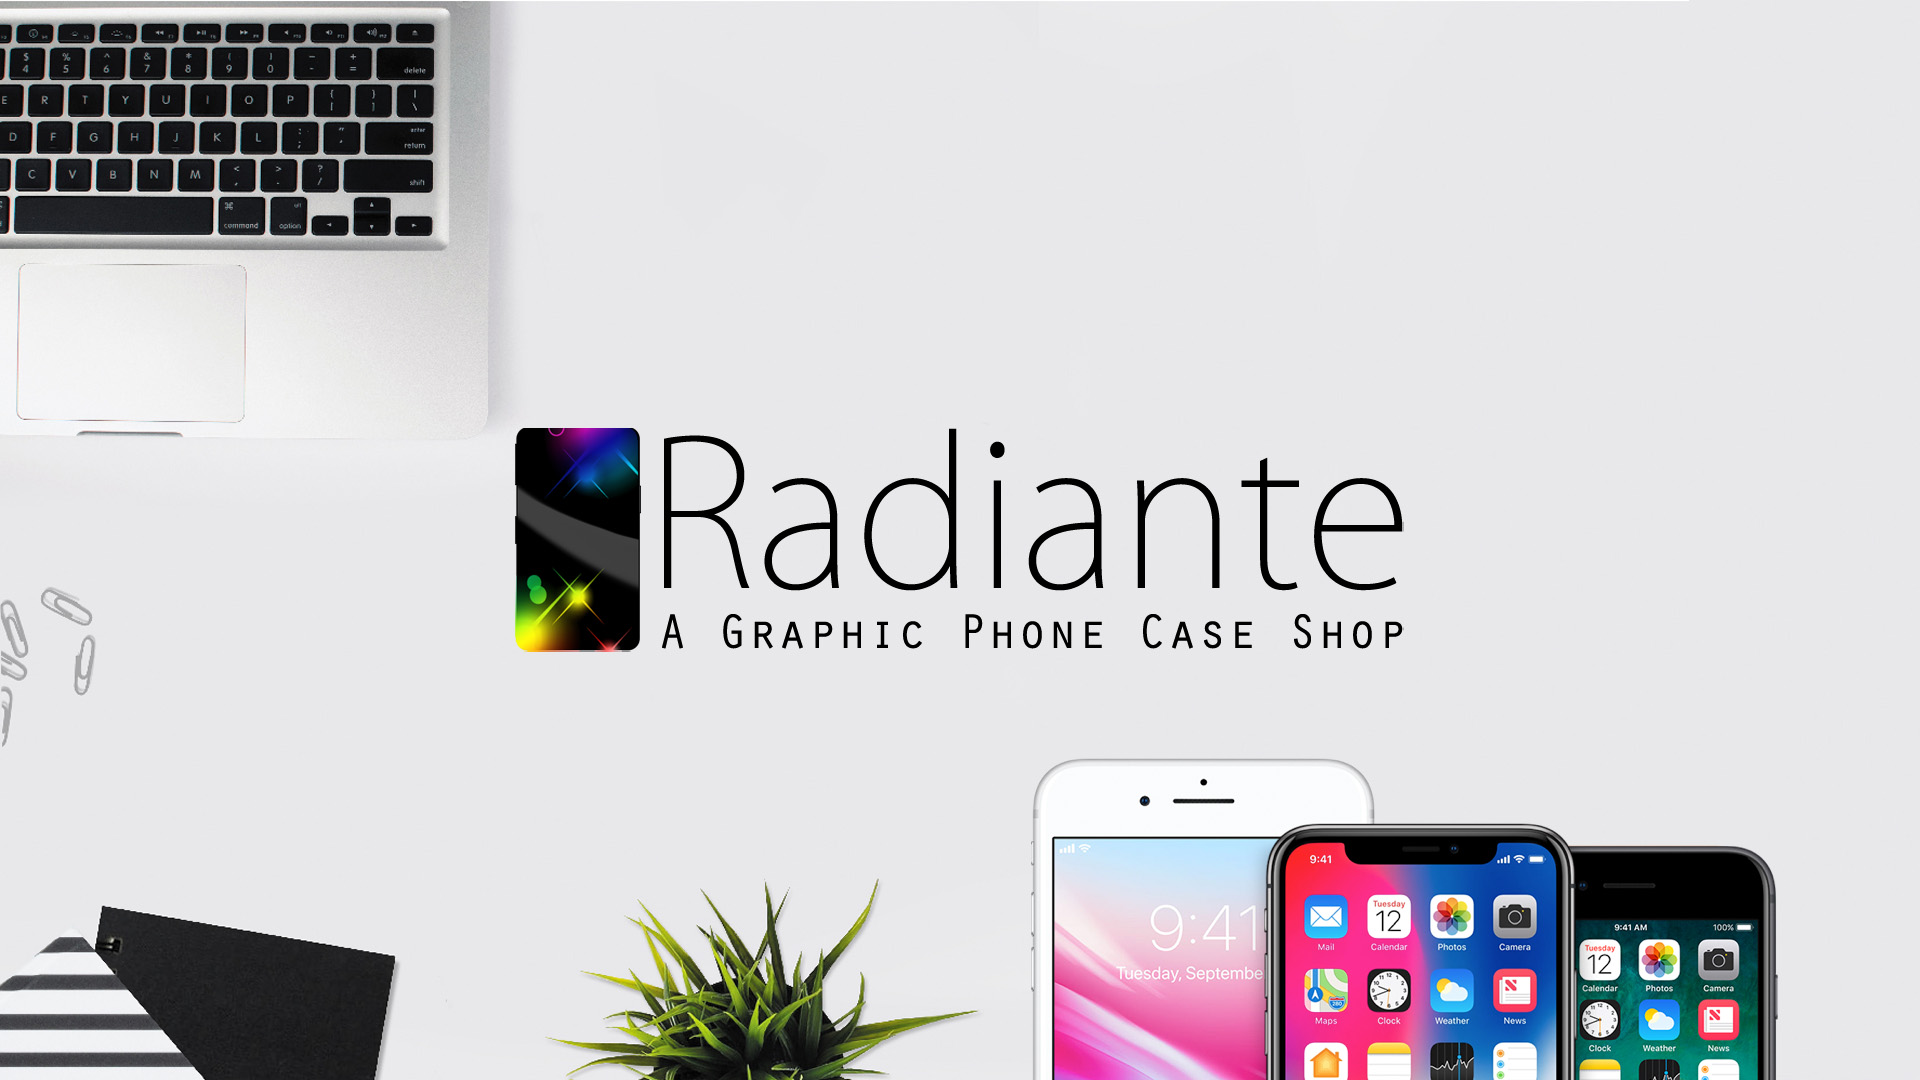 Radiante brand logo with smartphones and a laptop.